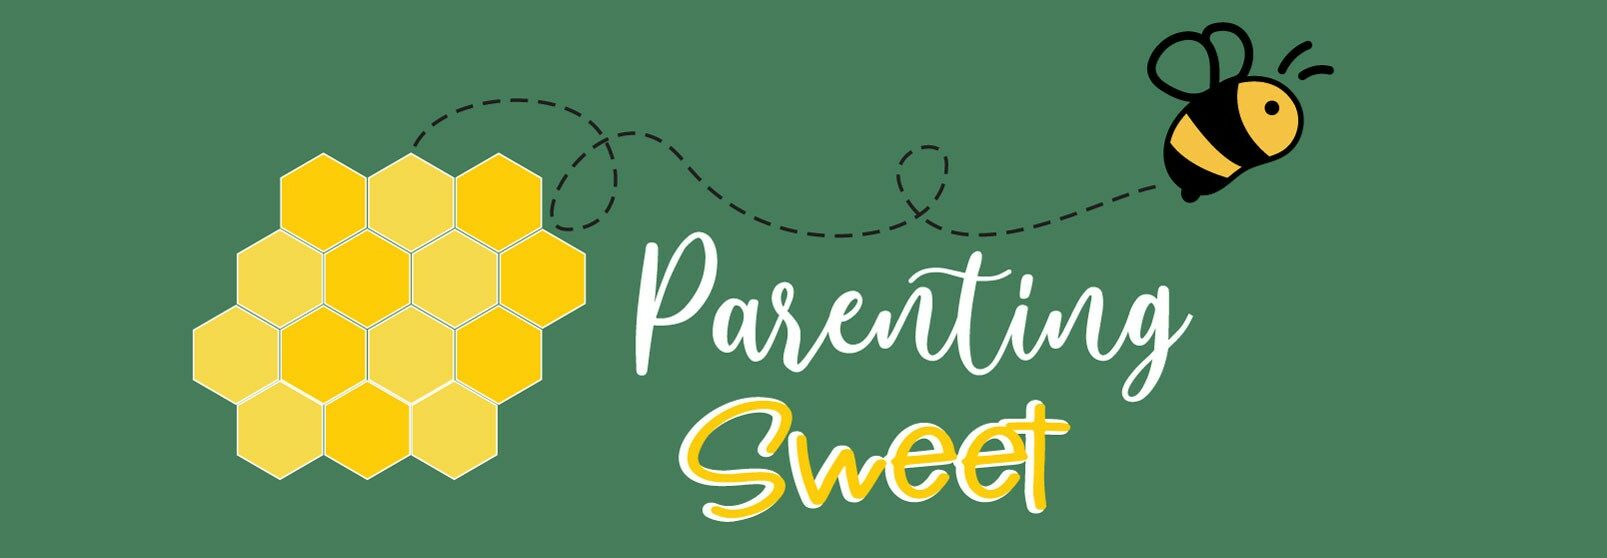 Parenting Sweet banner